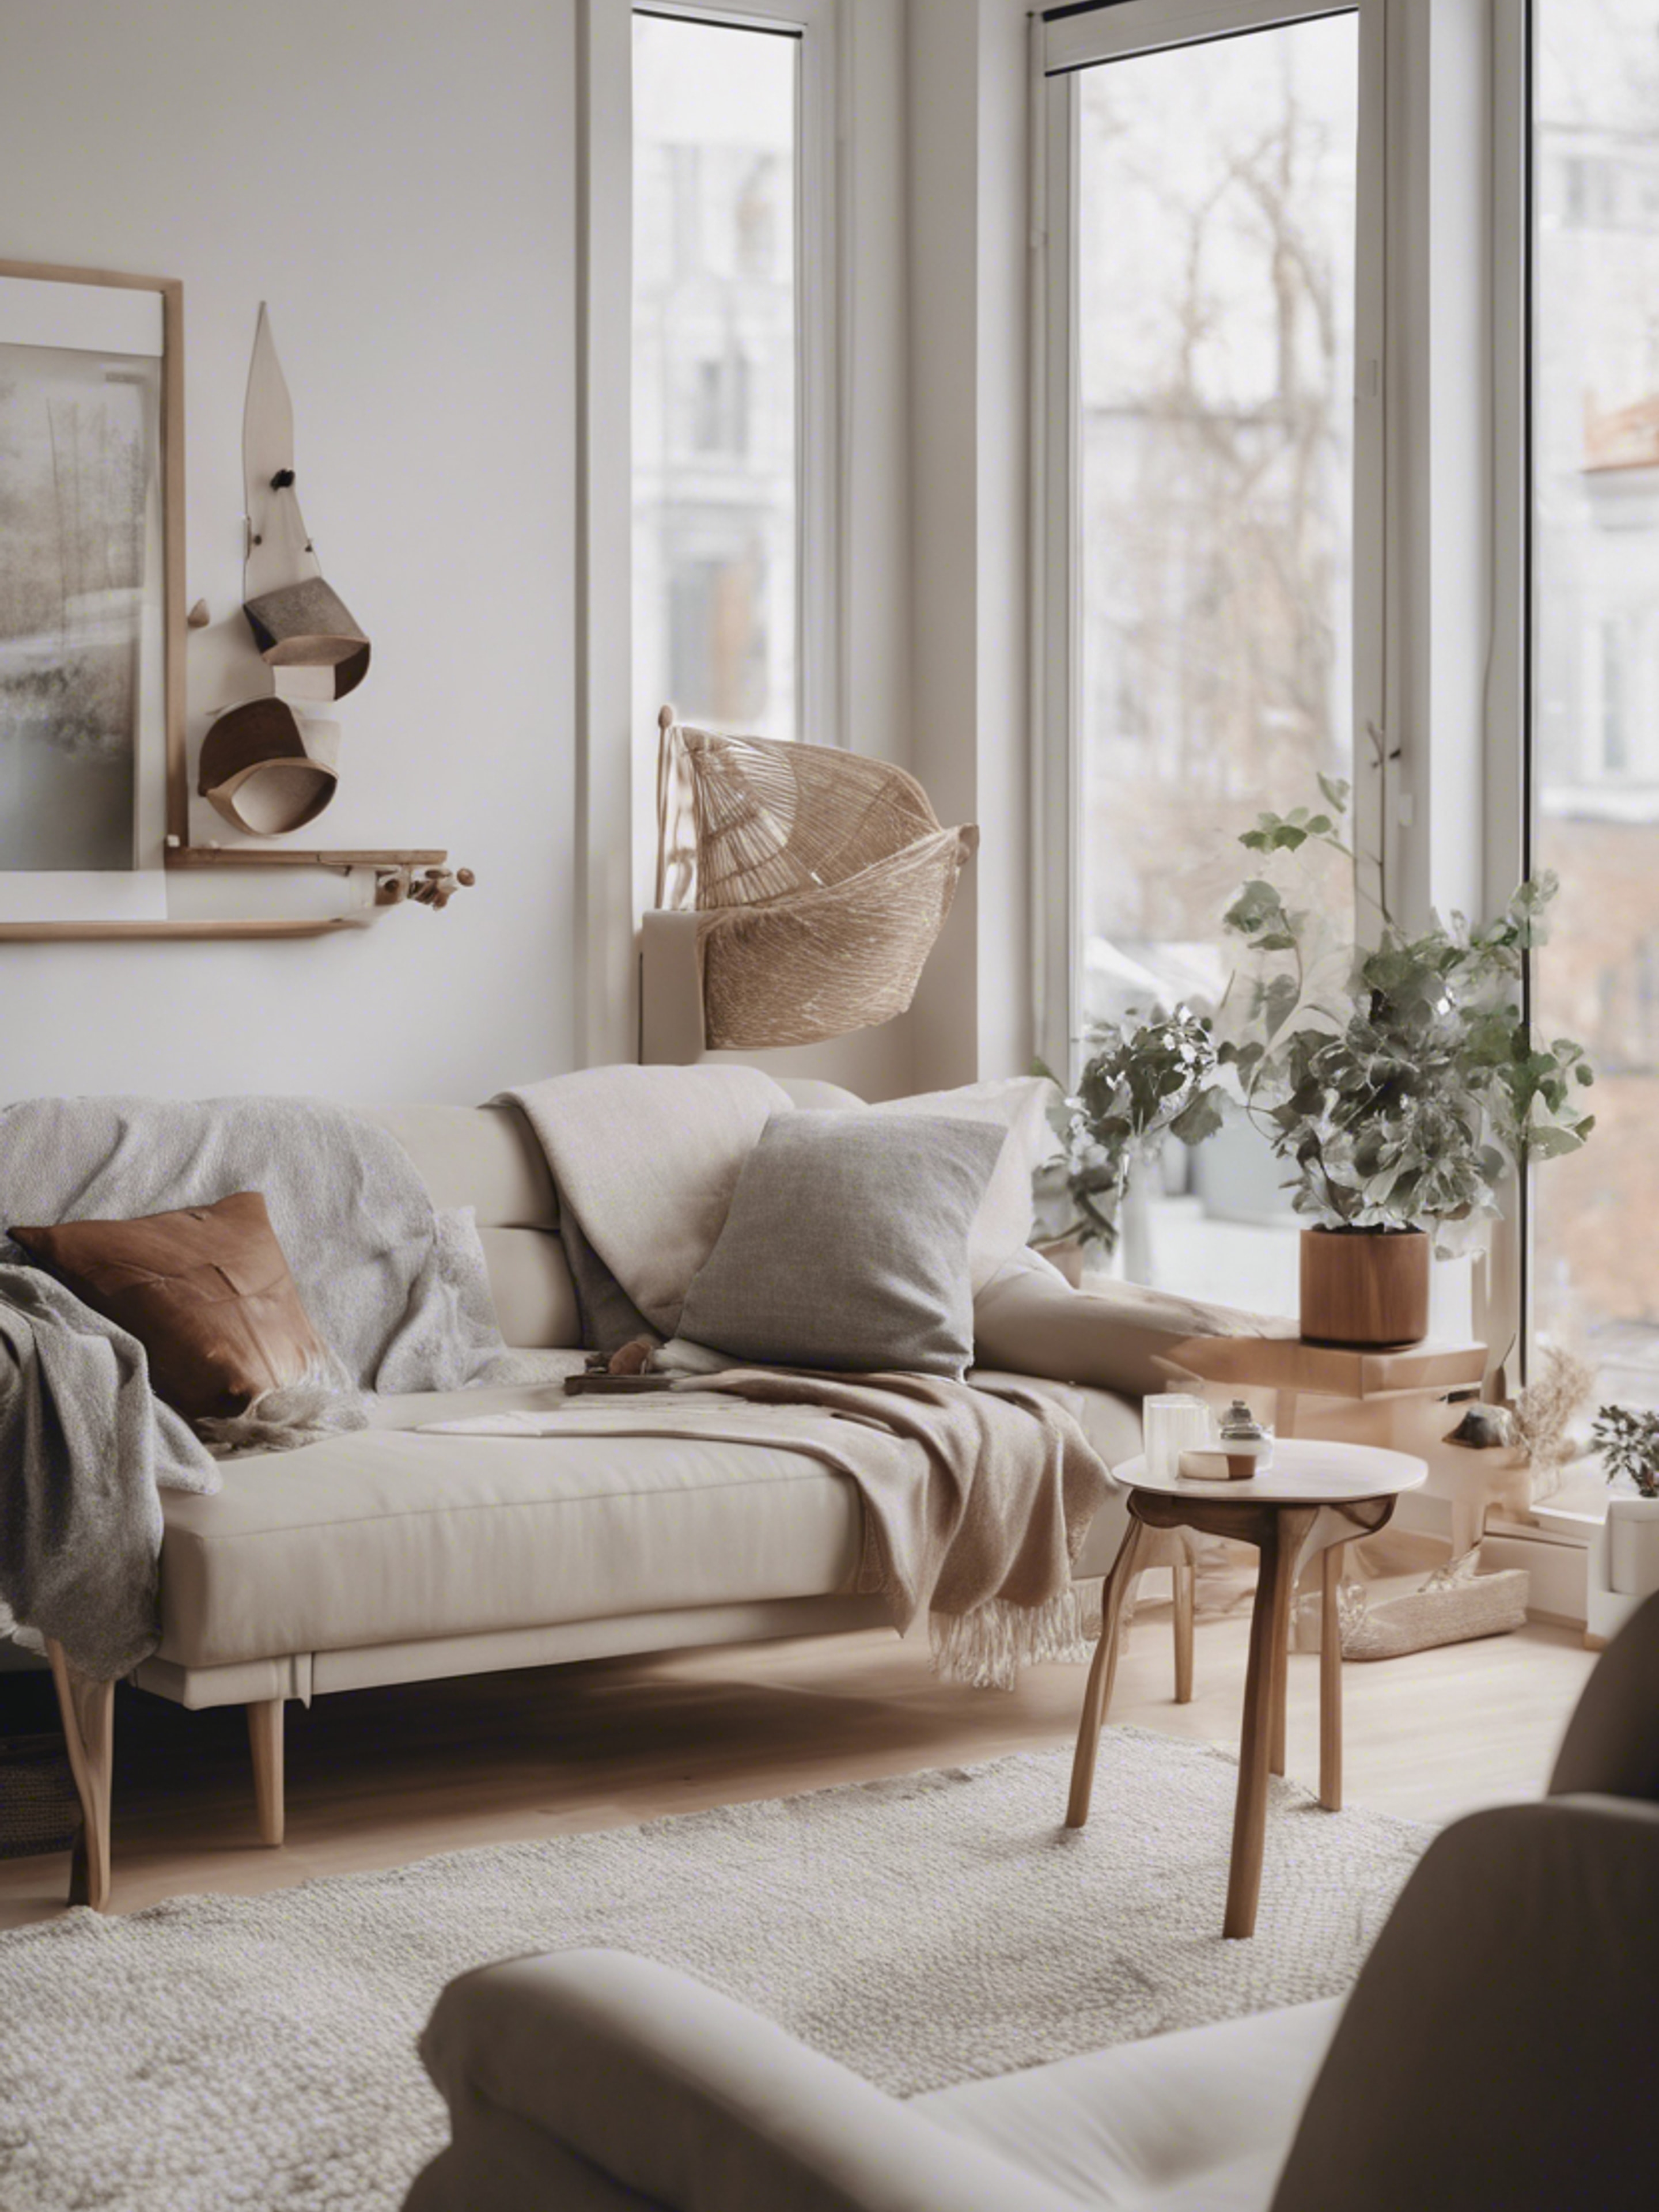 A Nordic-styled apartment with minimalist design, neutral color palette, and cozy accents. Tapeta[7cbaae500de44ae0bb2d]